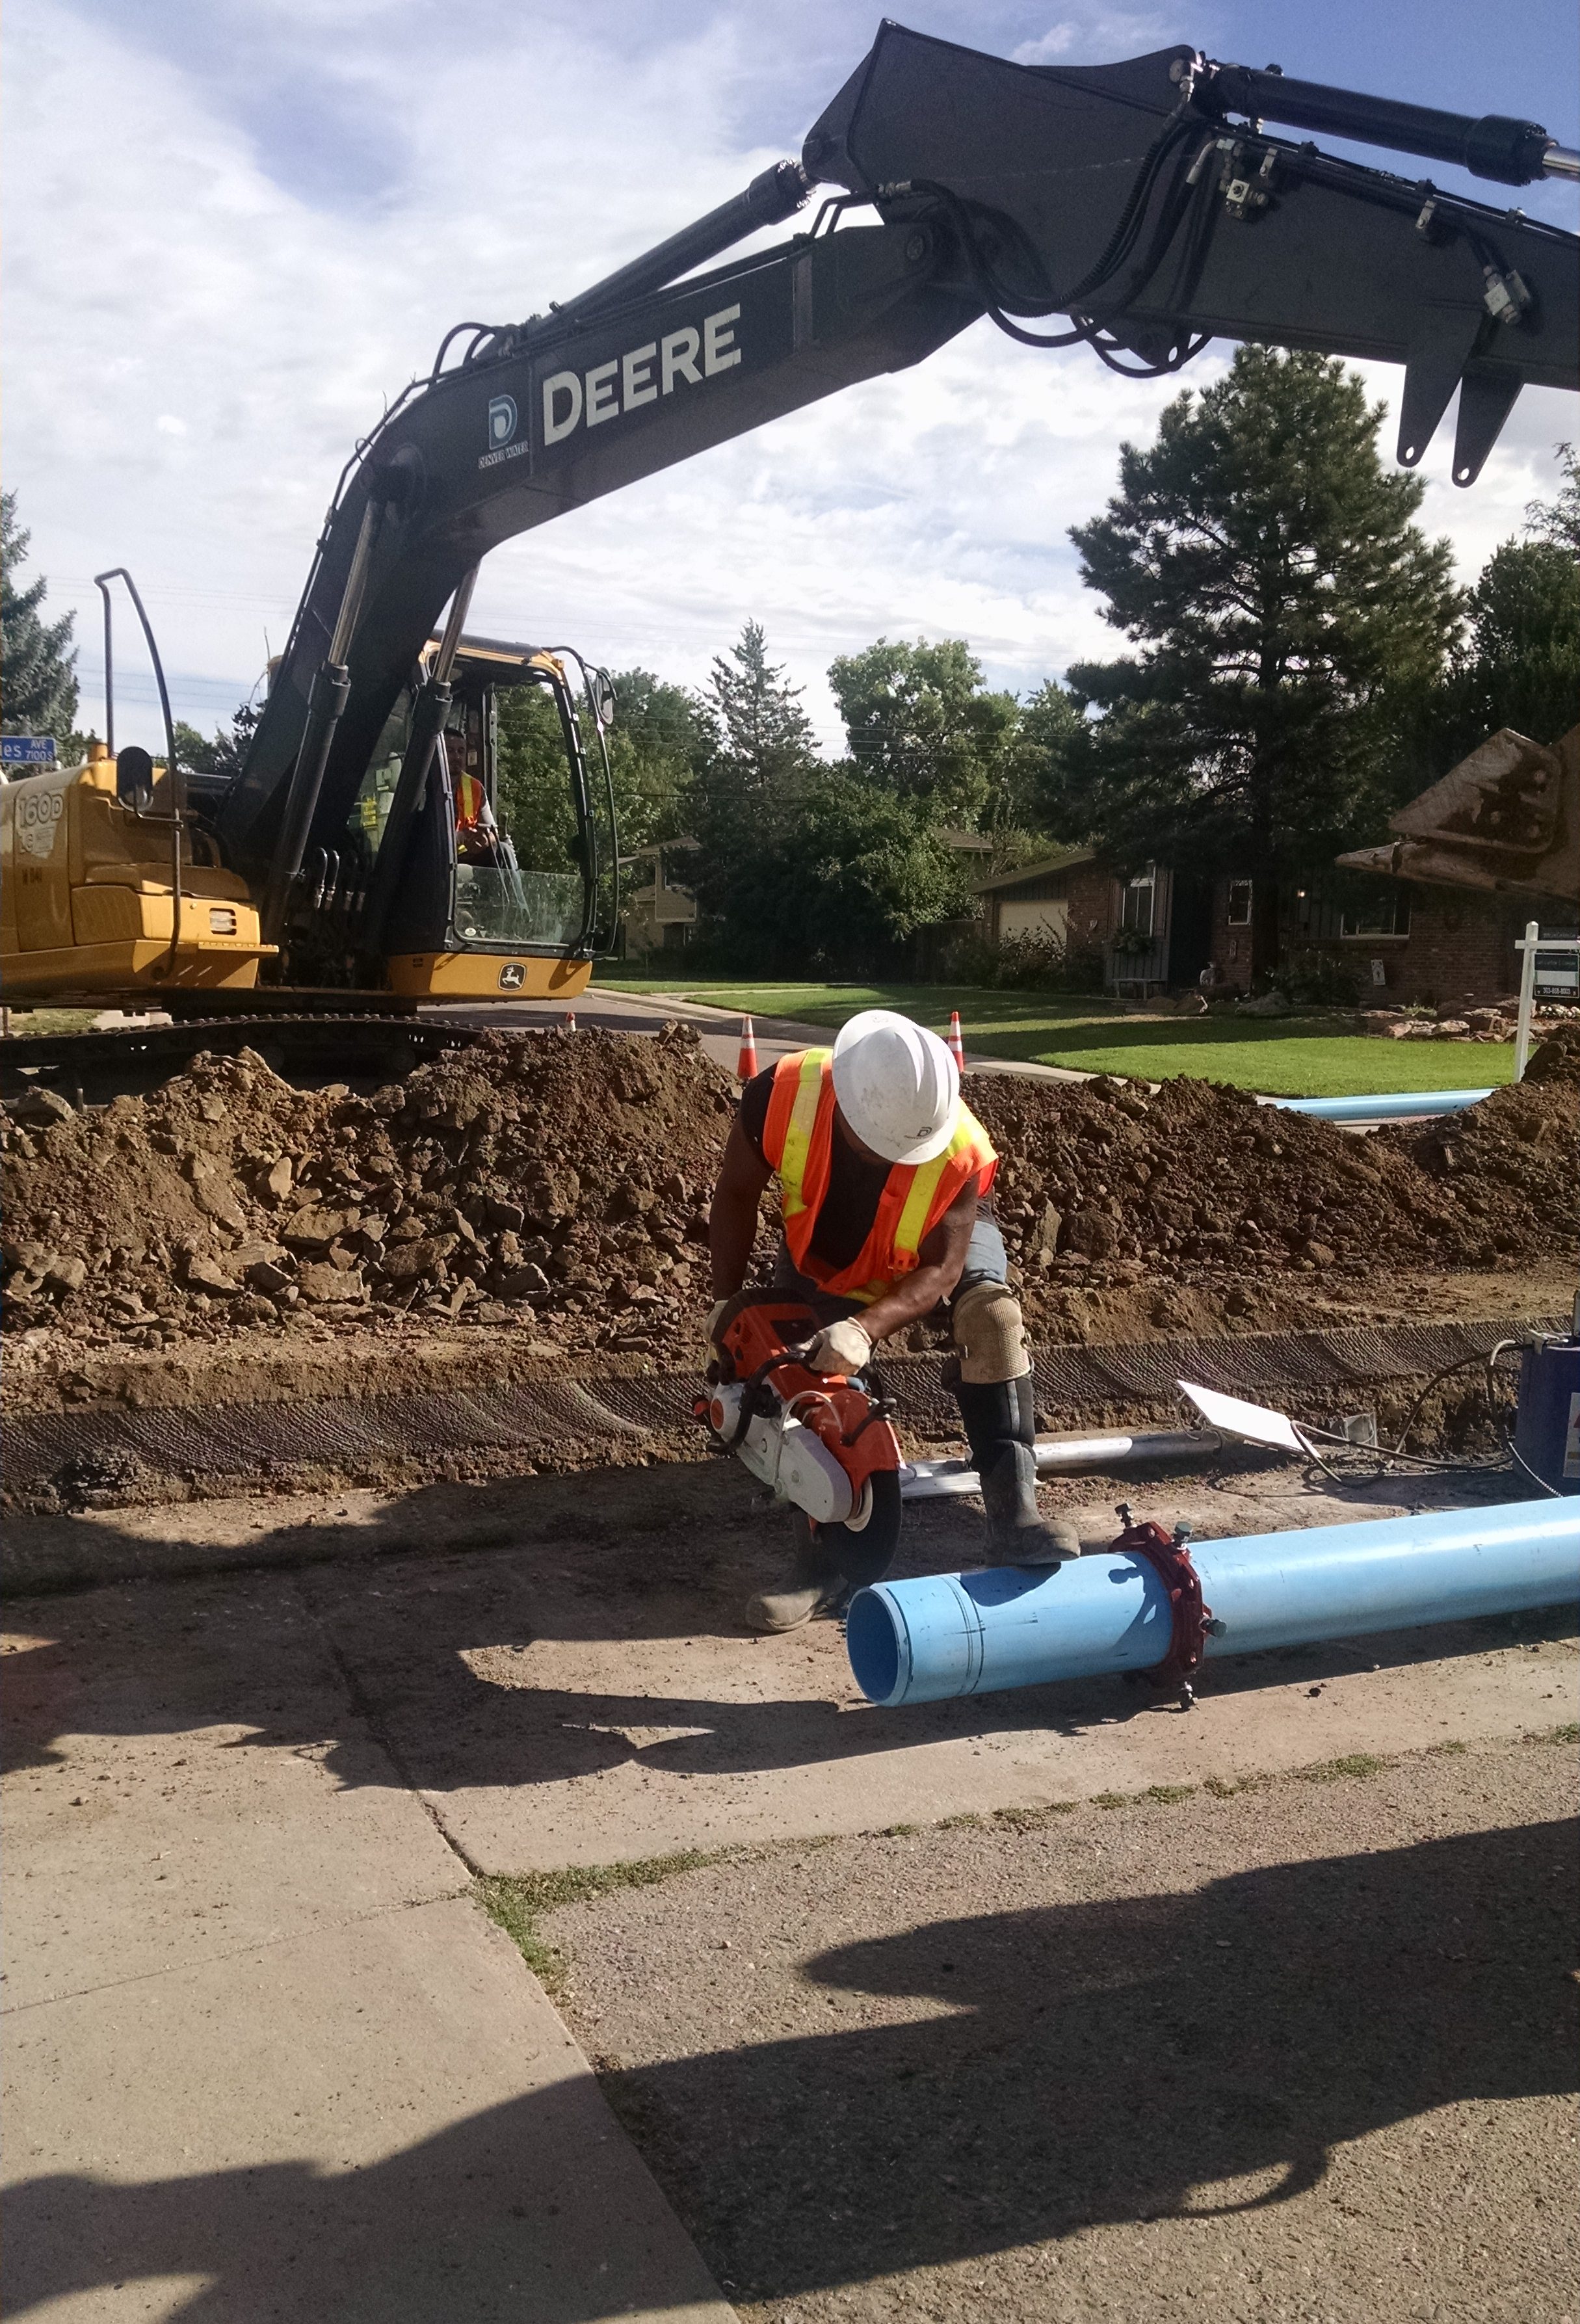 Denver Water crews proactively install or replace an average of 60,000 feet of pipe throughout our service area per year. About $11 million will go to main replacement and main improvement in 2016 and $130 million will be invested in main replacements over the next 10 years.